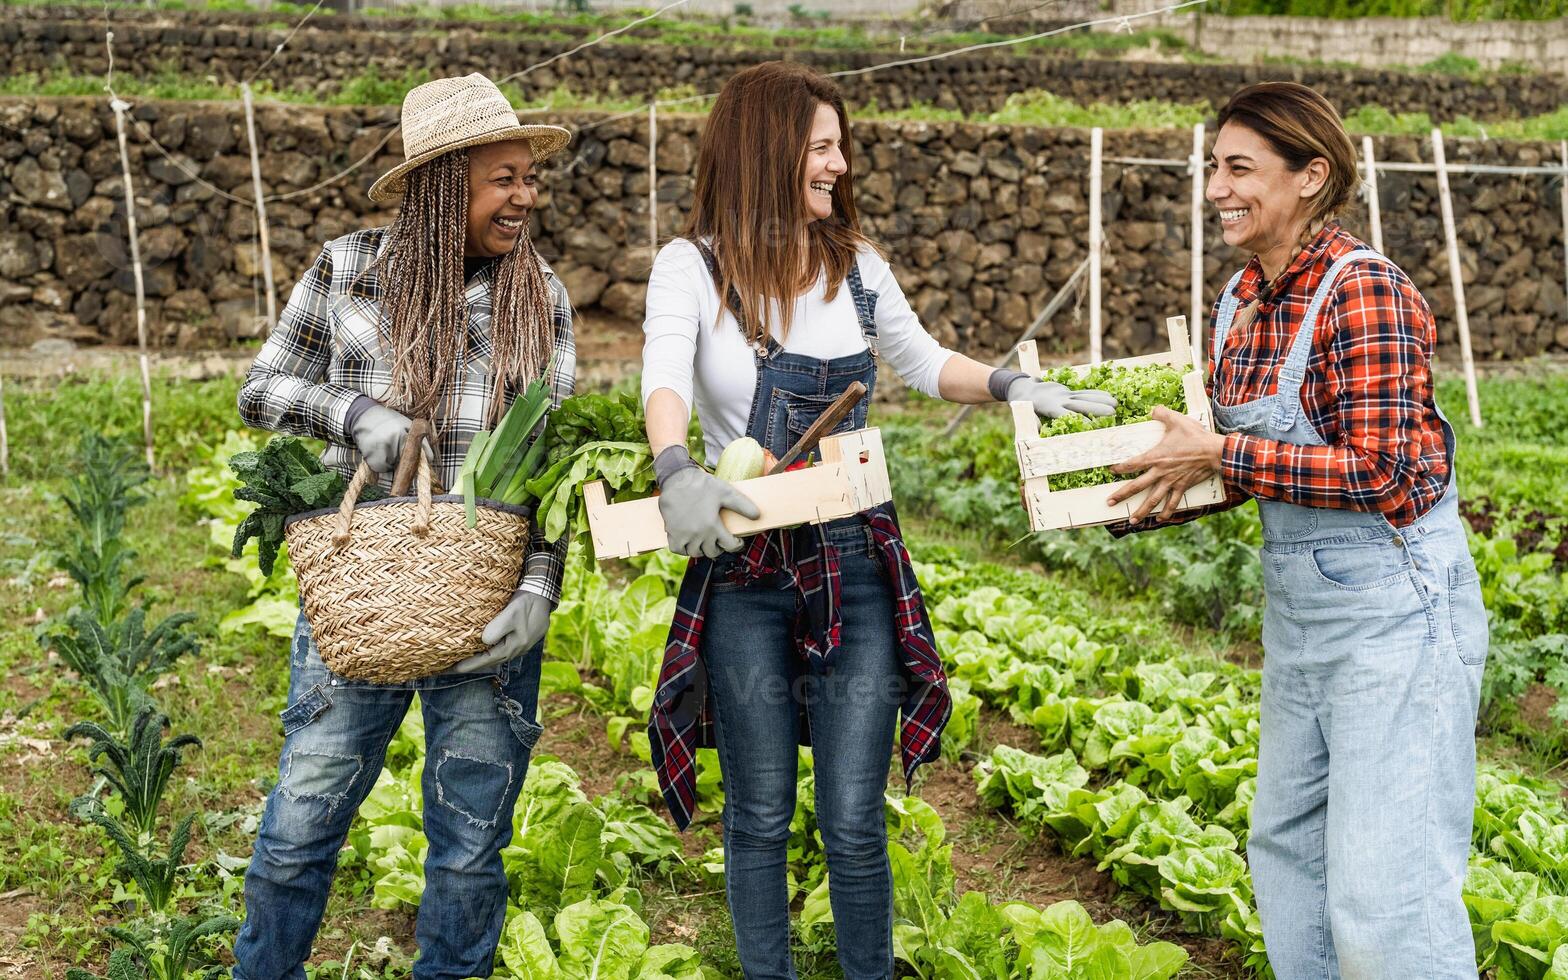 Multiracial female farmers working in countryside harvesting fresh vegetables - Farm people lifestyle concept photo